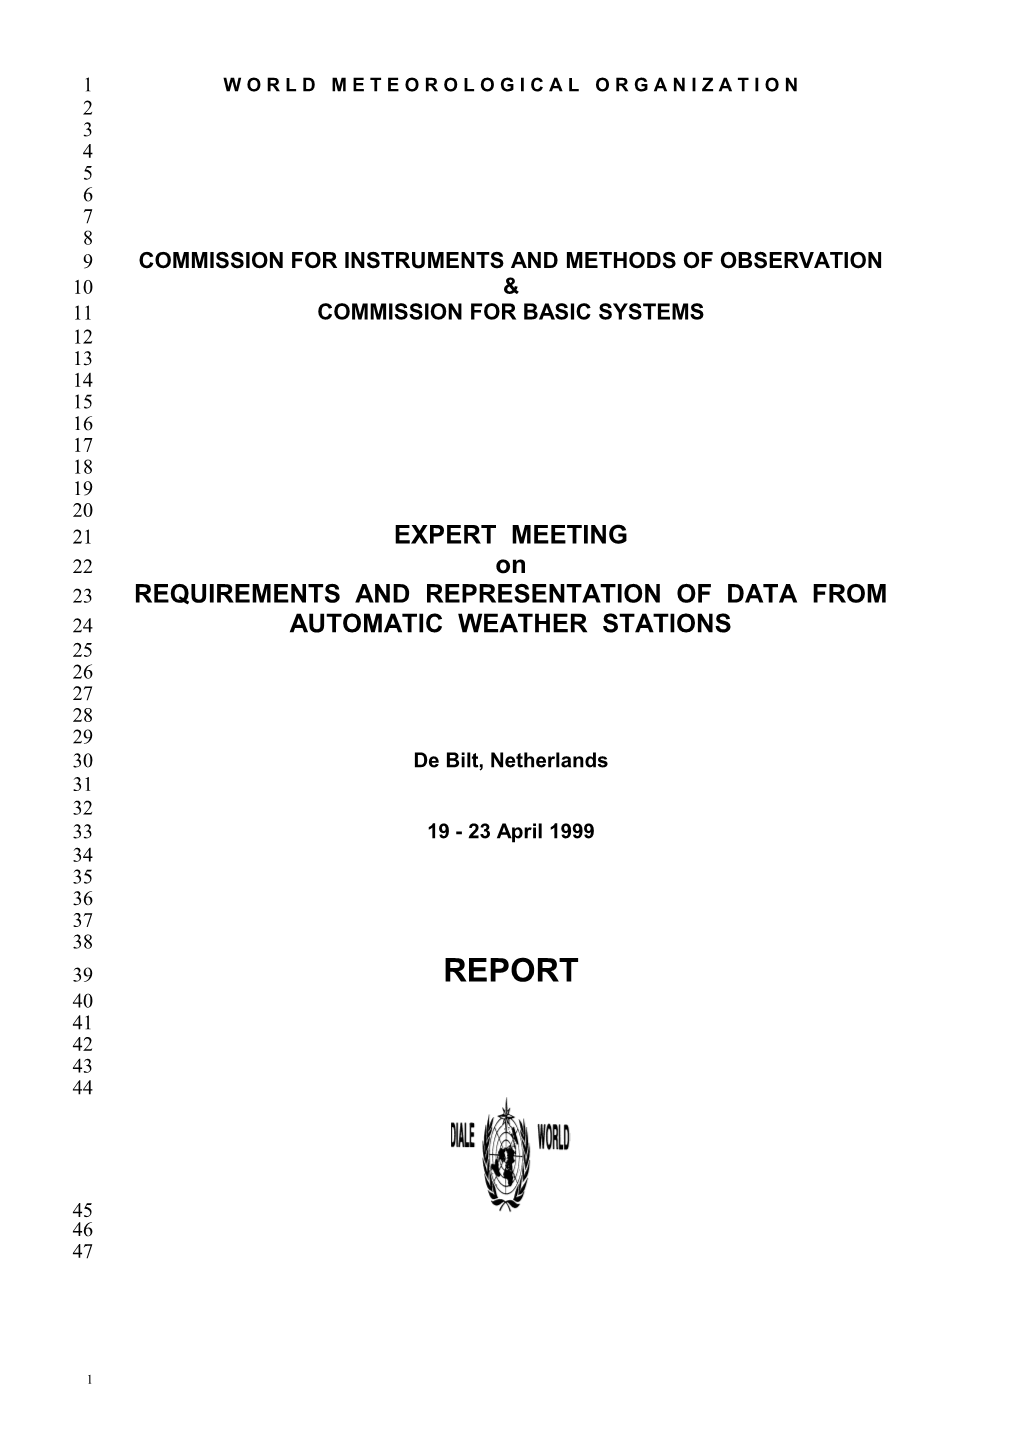 Commission for Instruments and Methods of Observation Commission for Basic Systems